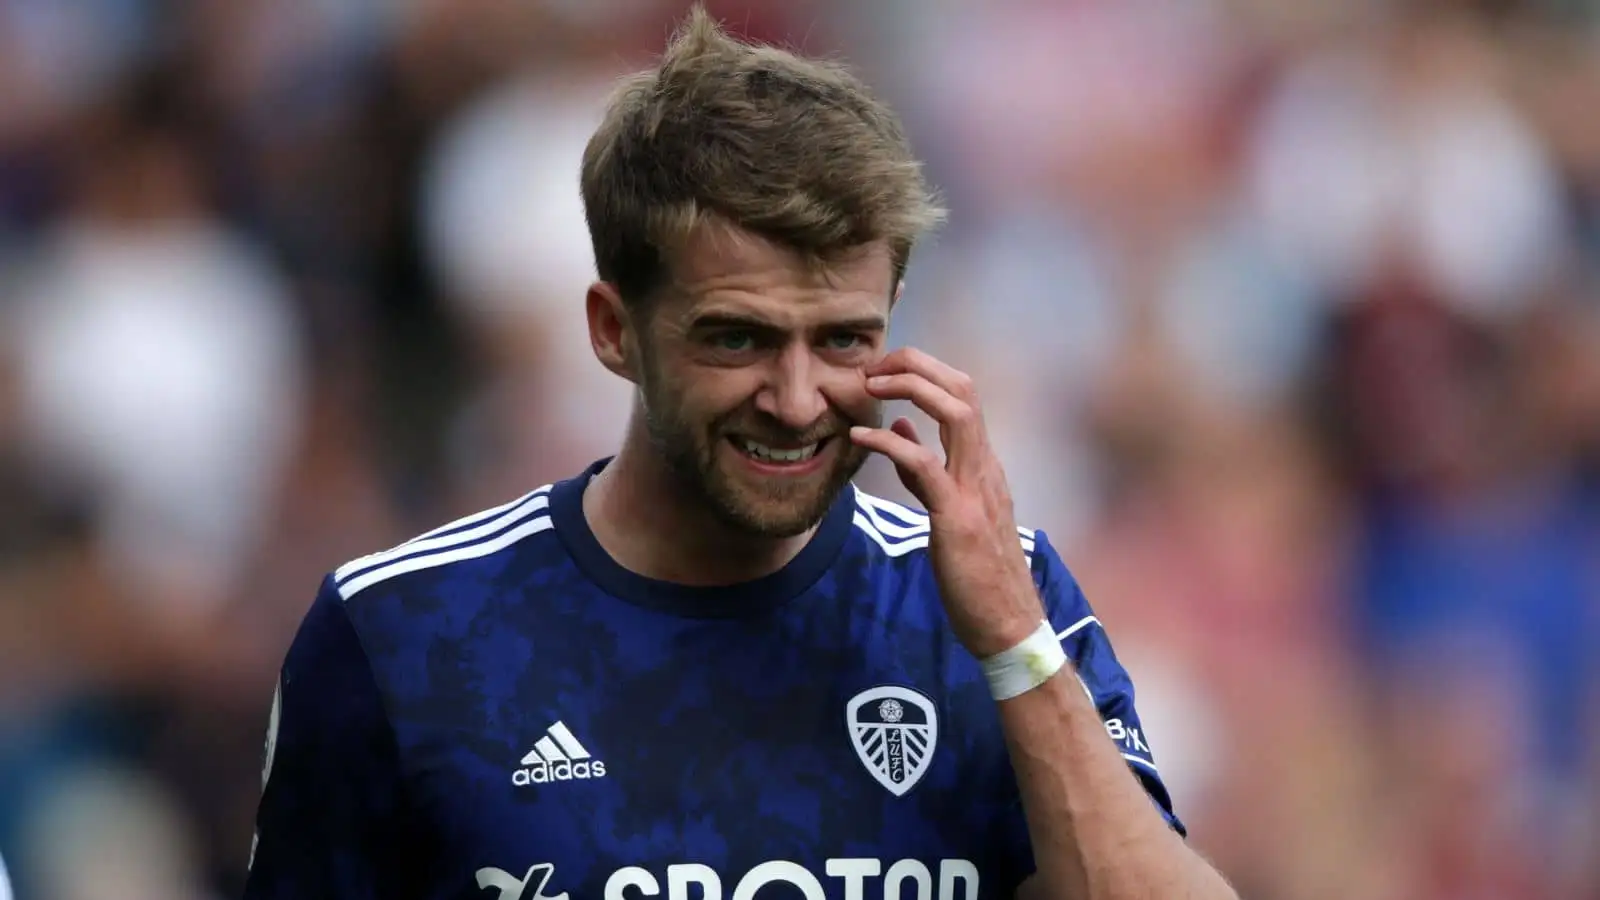 Patrick Bamford news: Ambitious Prem club plot move for striker, with two Leeds teammates also wanted